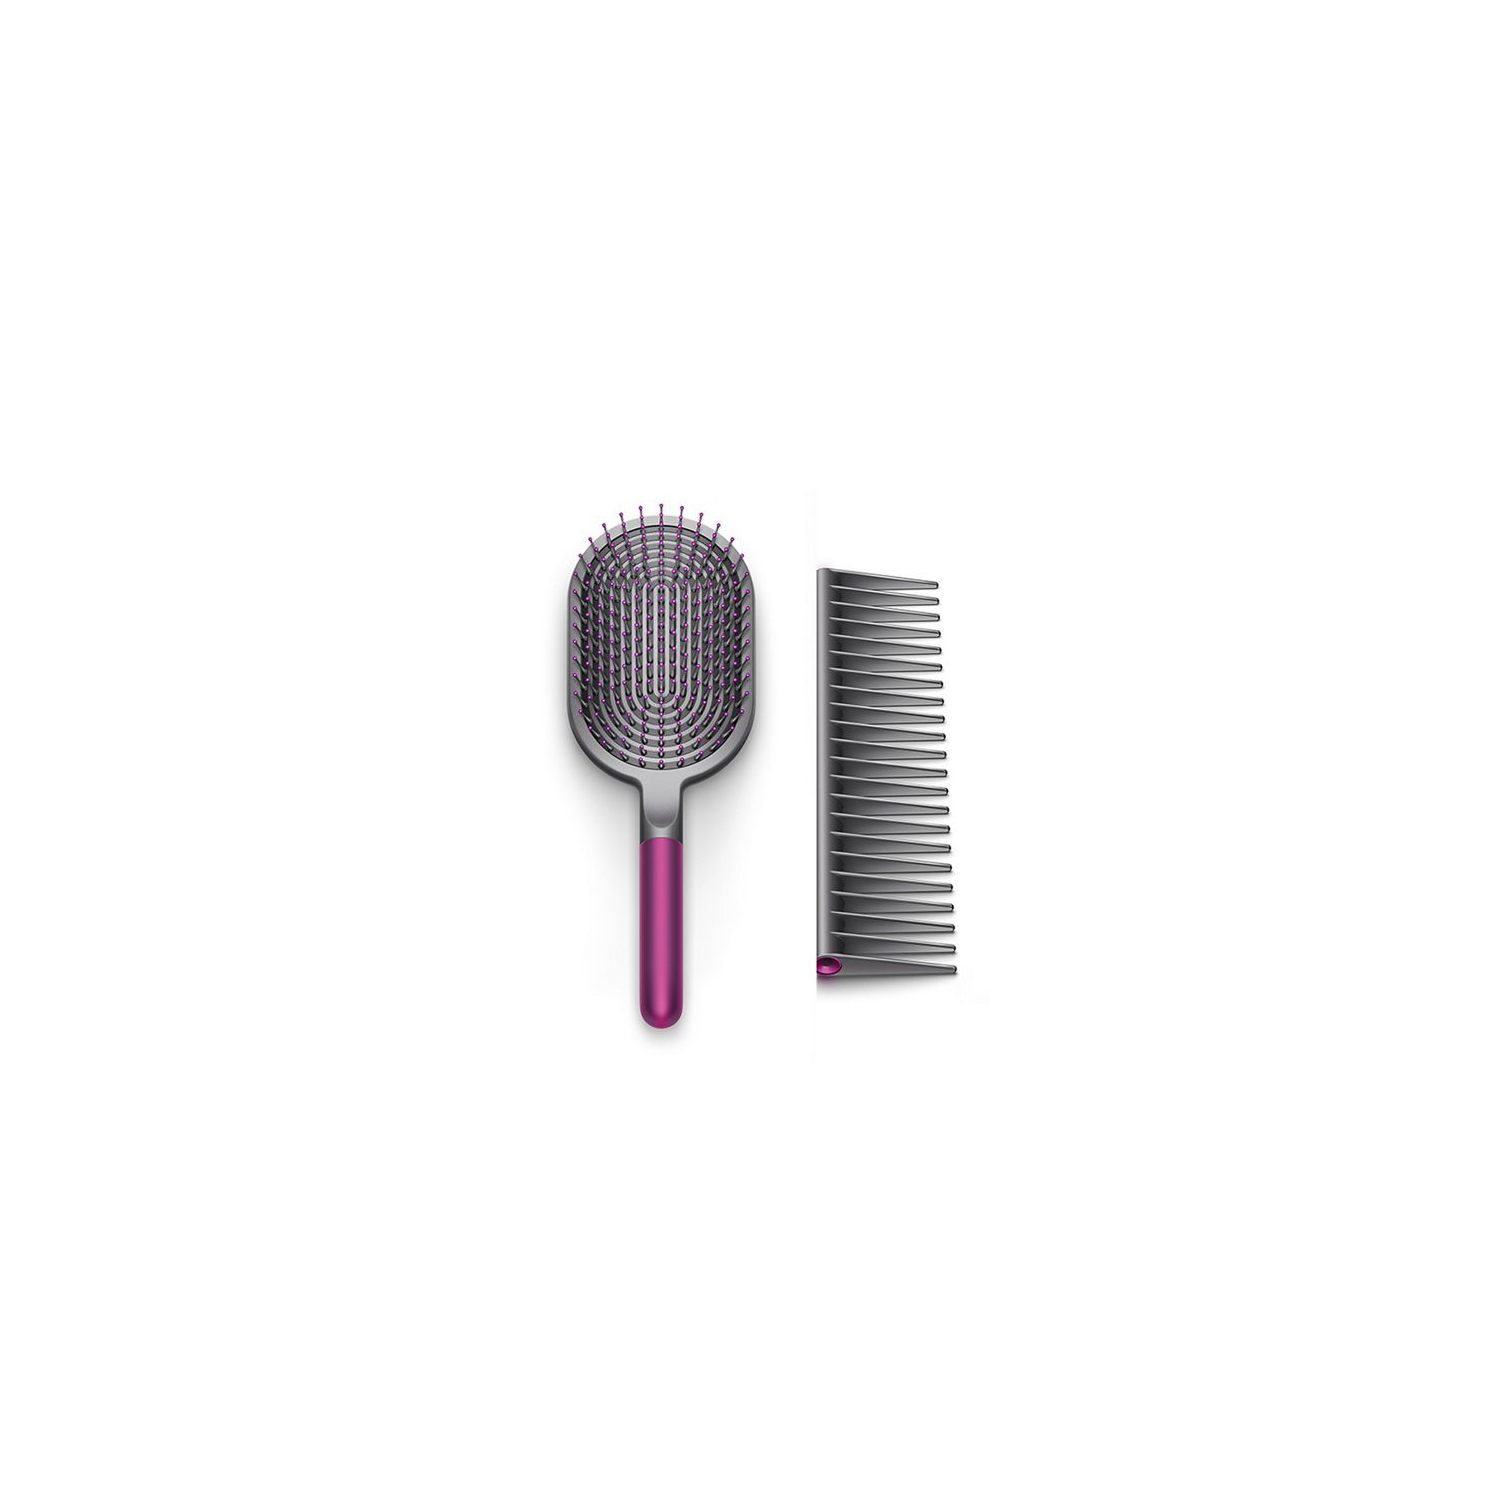  Casdon 73252 Dyson Supersonic Styling Set, Interactive Toy  Hairdryer for Children Aged 3 Years & Up